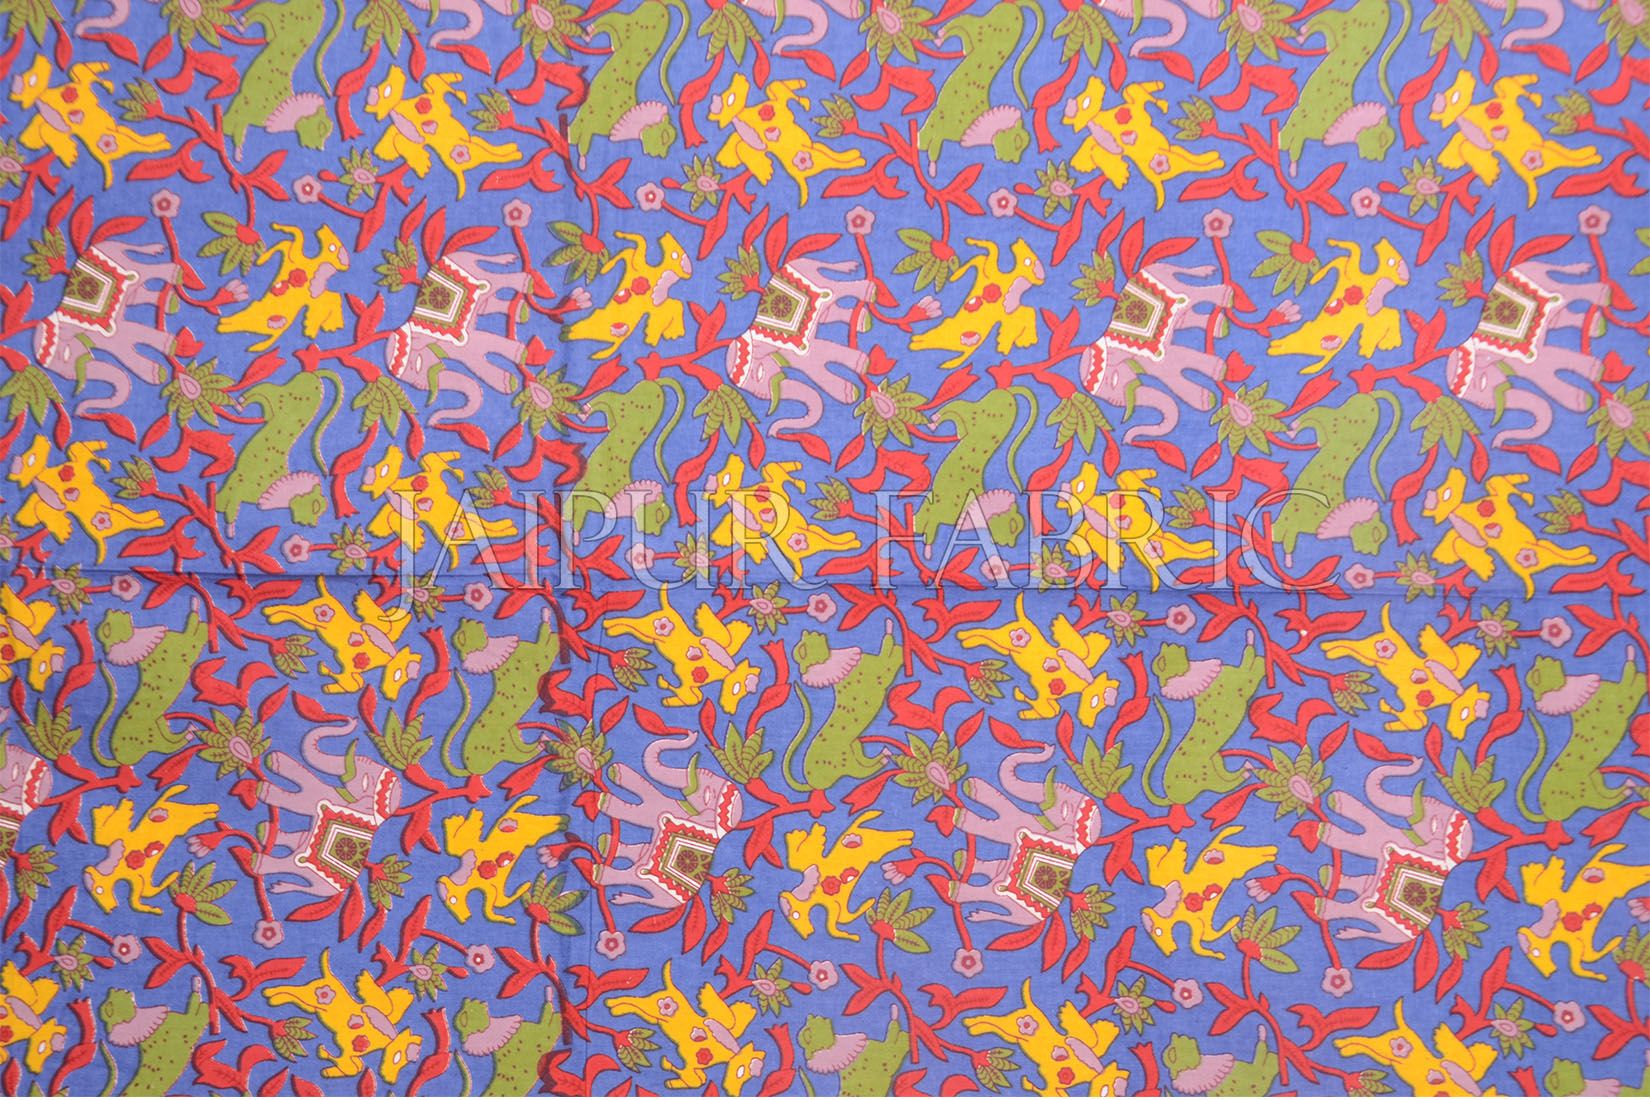 Blue Elephant and Tropical Printed Rajasthani Cotton Single Bed Sheet